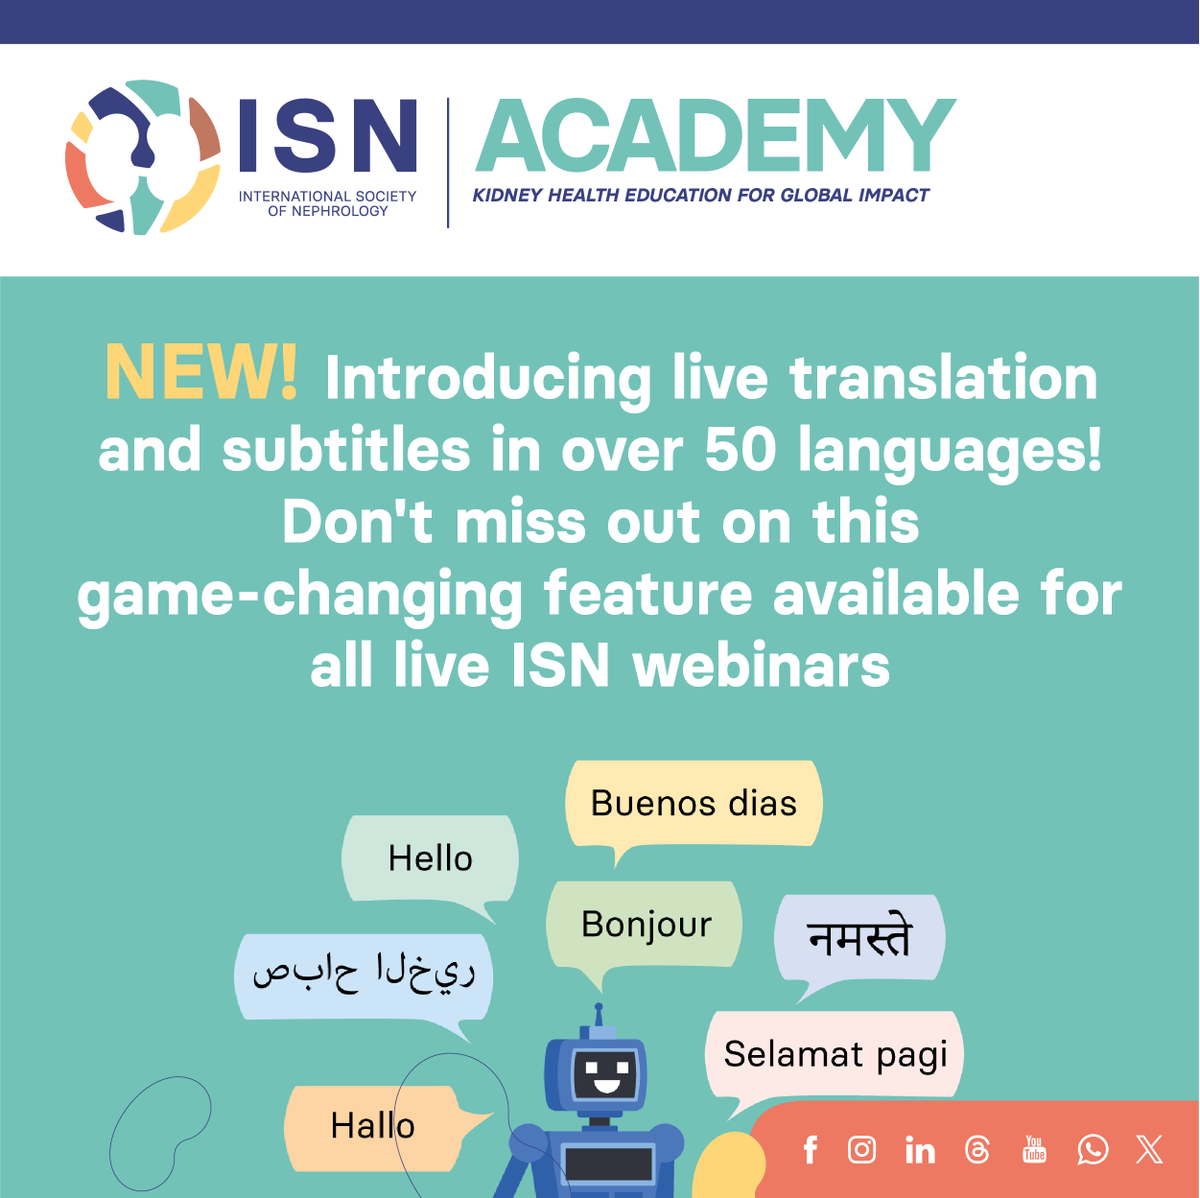 NEW! Introducing live translation and subtitles in over 50 languages! Don't miss out on this game-changing feature available for all live ISN webinars